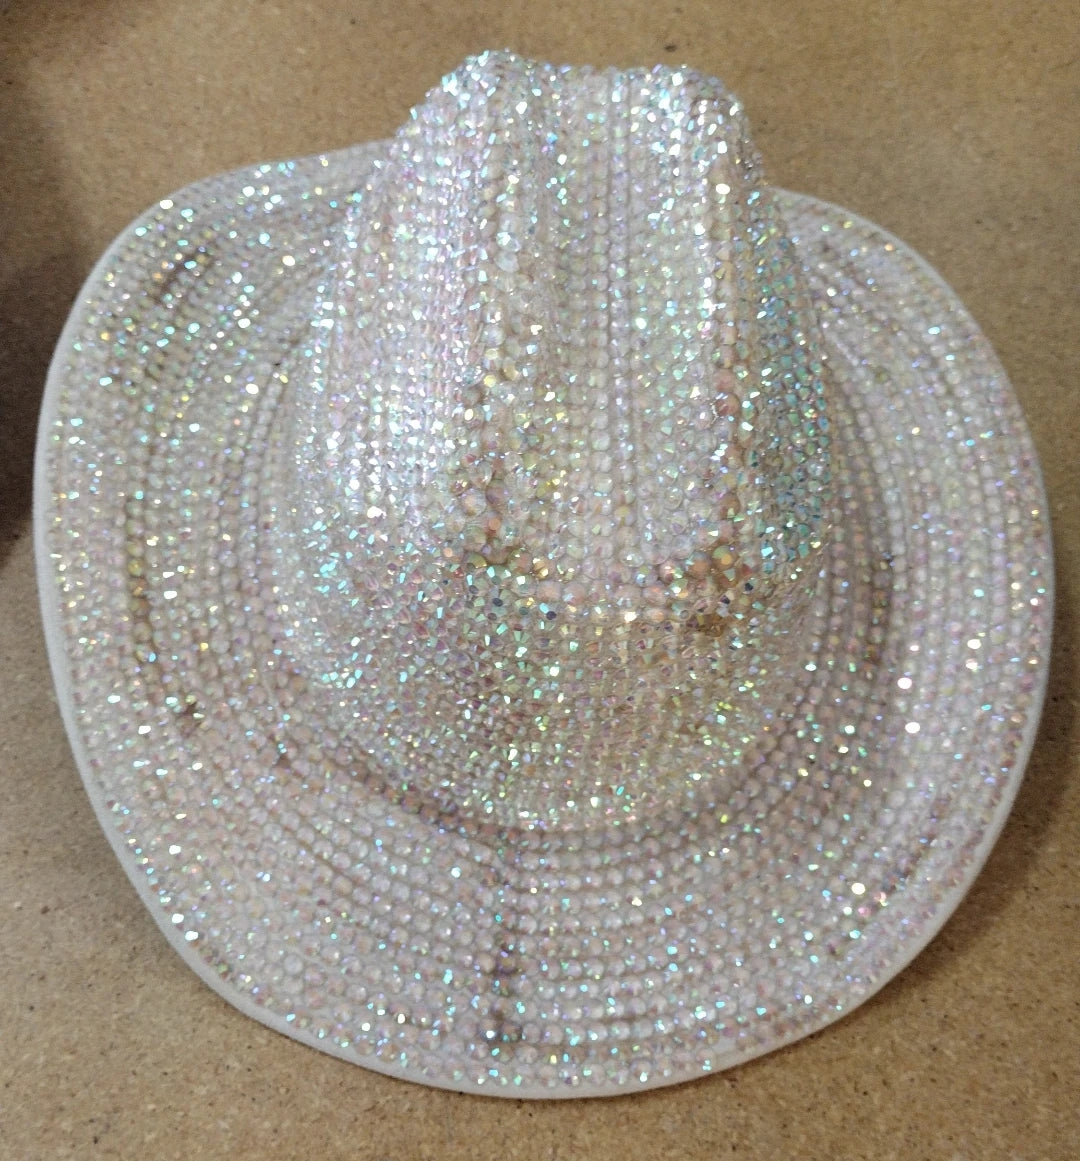 Cowboy Hat From Gucci - Bling3t